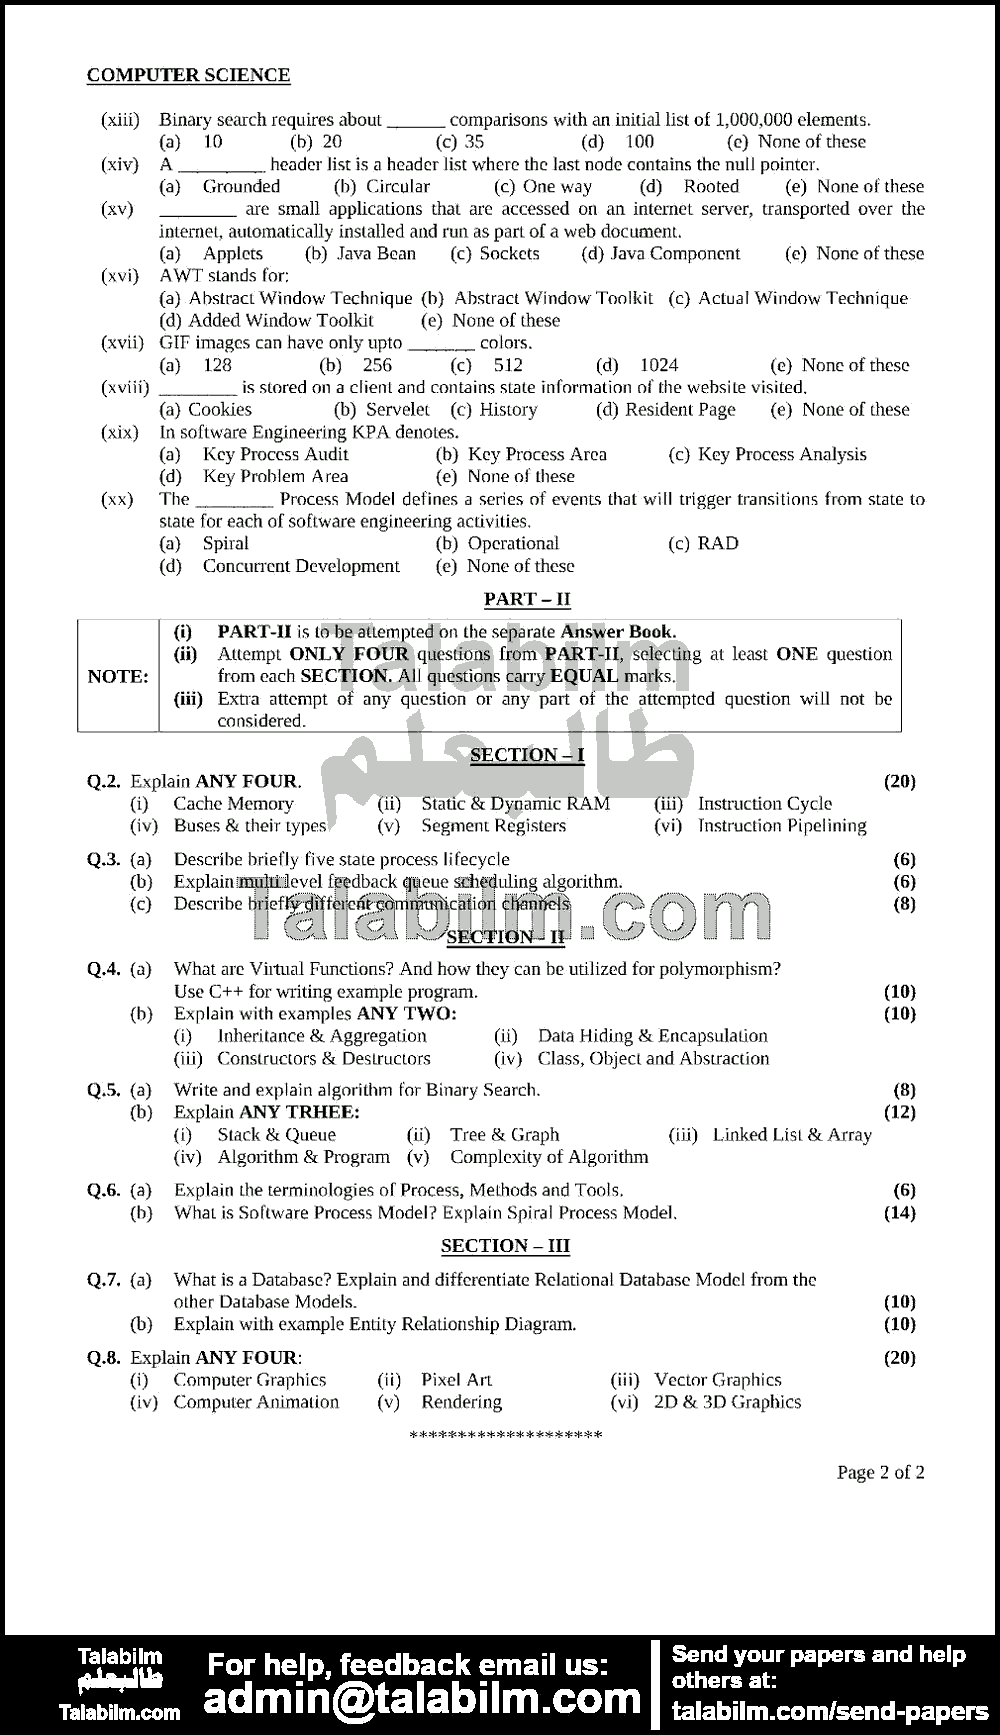 Computer Science 0 past paper for 2009 Page No. 2